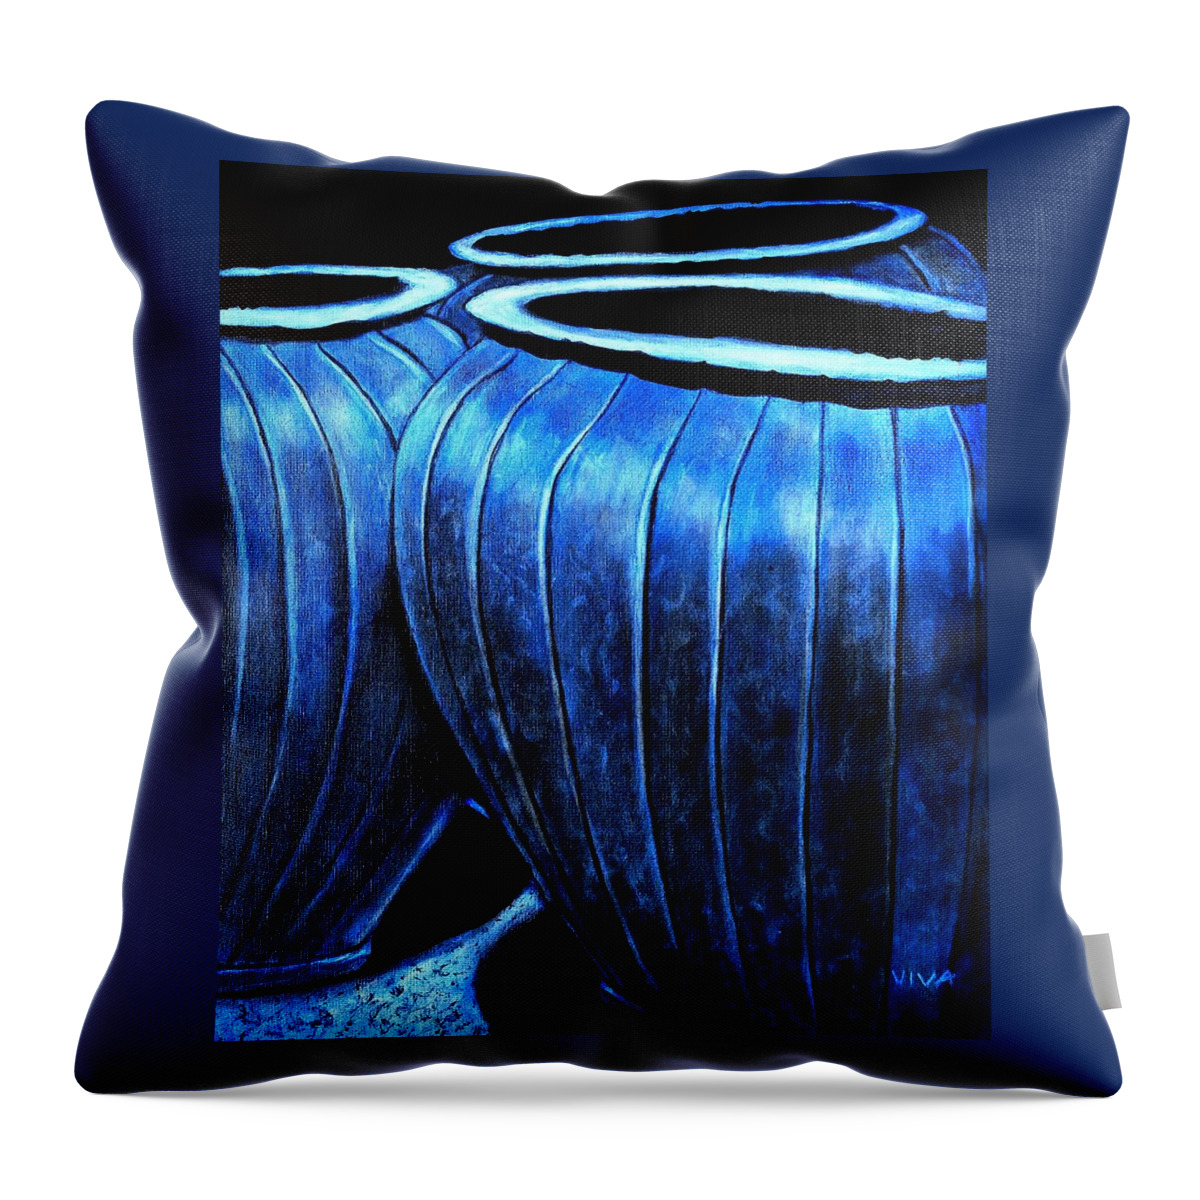 Viva Throw Pillow featuring the painting Pinstripe Pots by VIVA Anderson